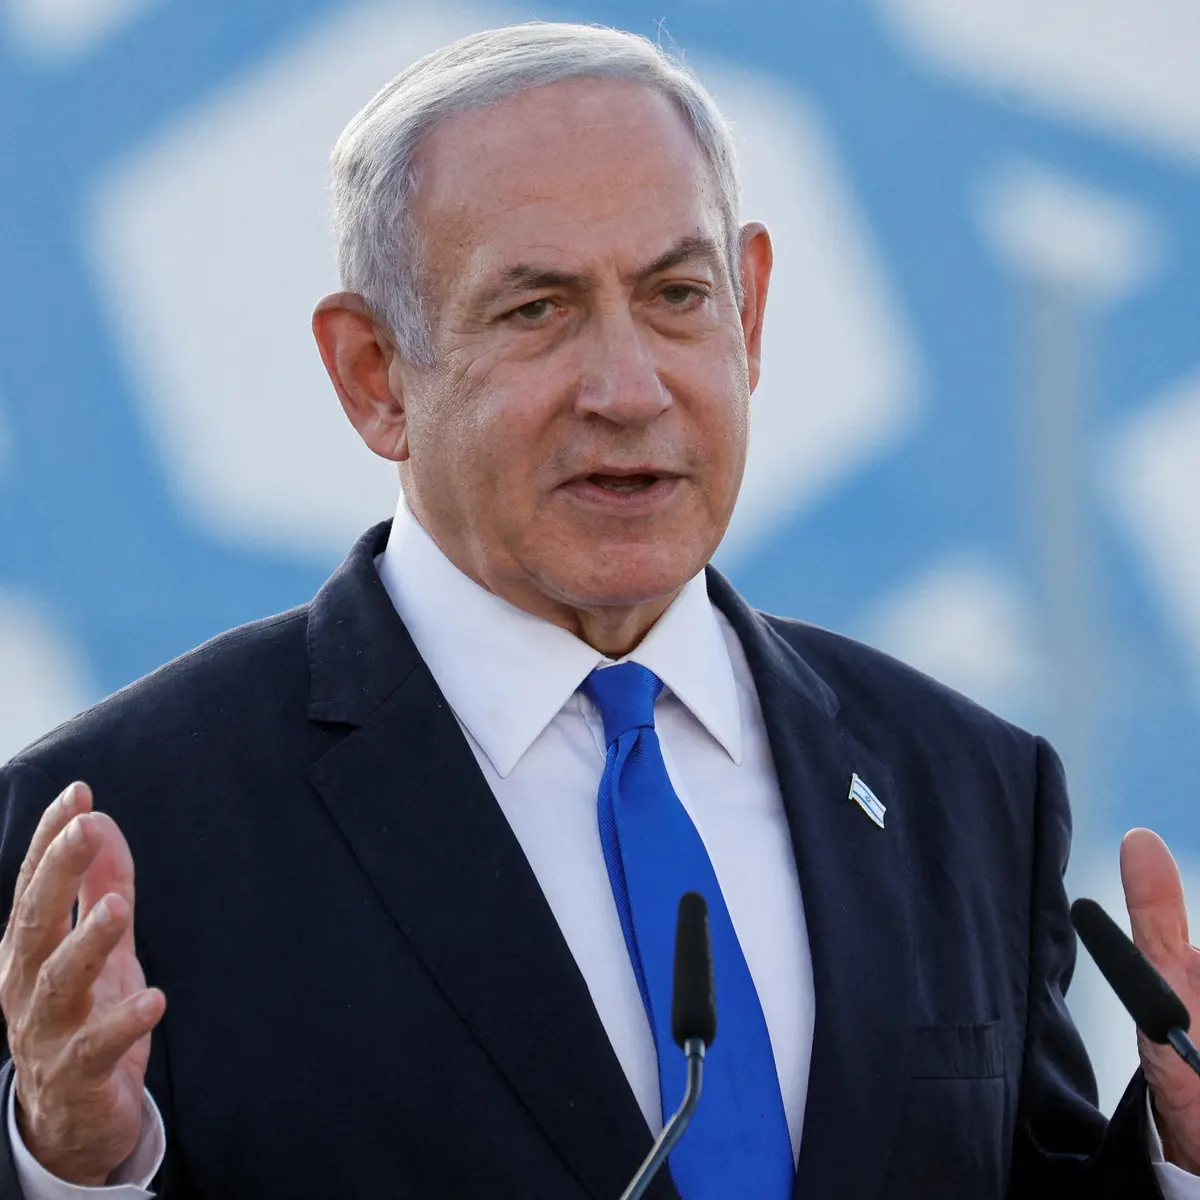 Netanyahu: “Israel does not seek to conquer, occupy, or govern Gaza”